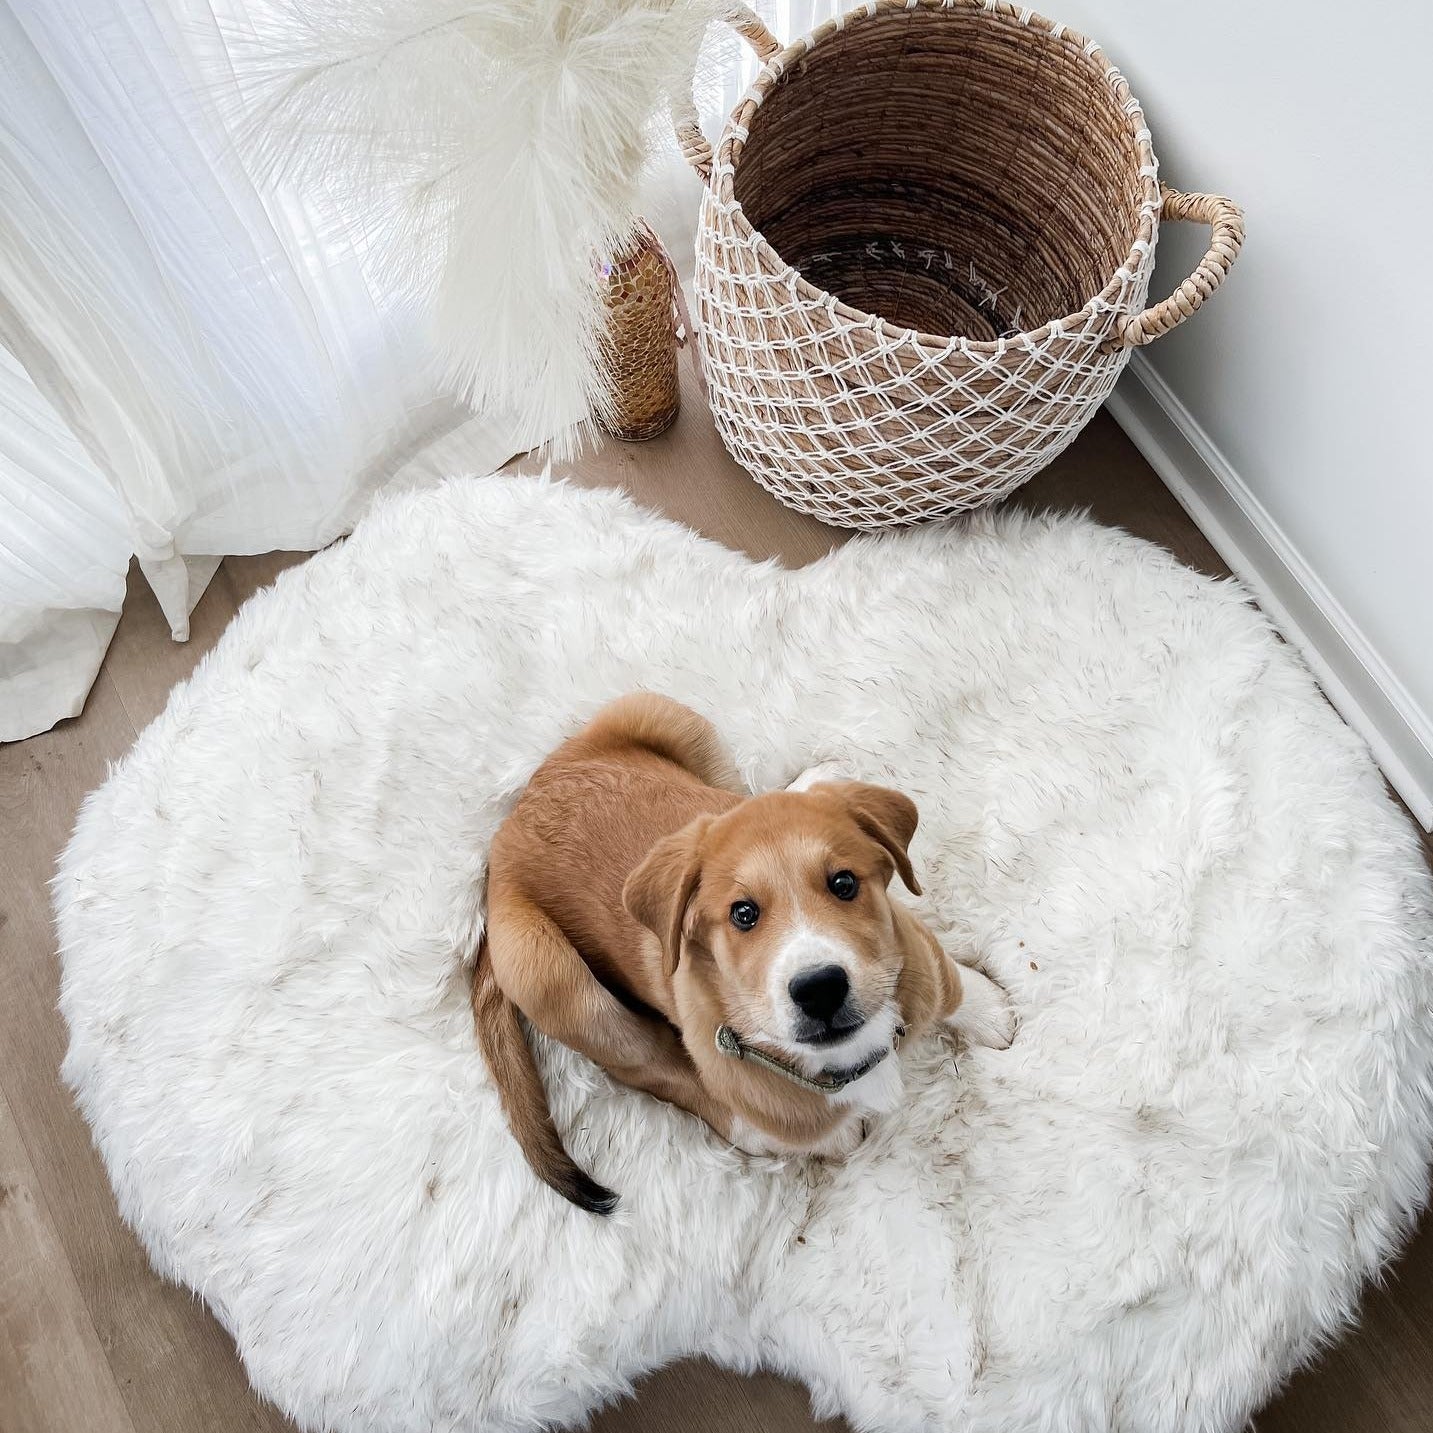 The 17 Best Durable Dog Beds - The Dog Guide San Antonio